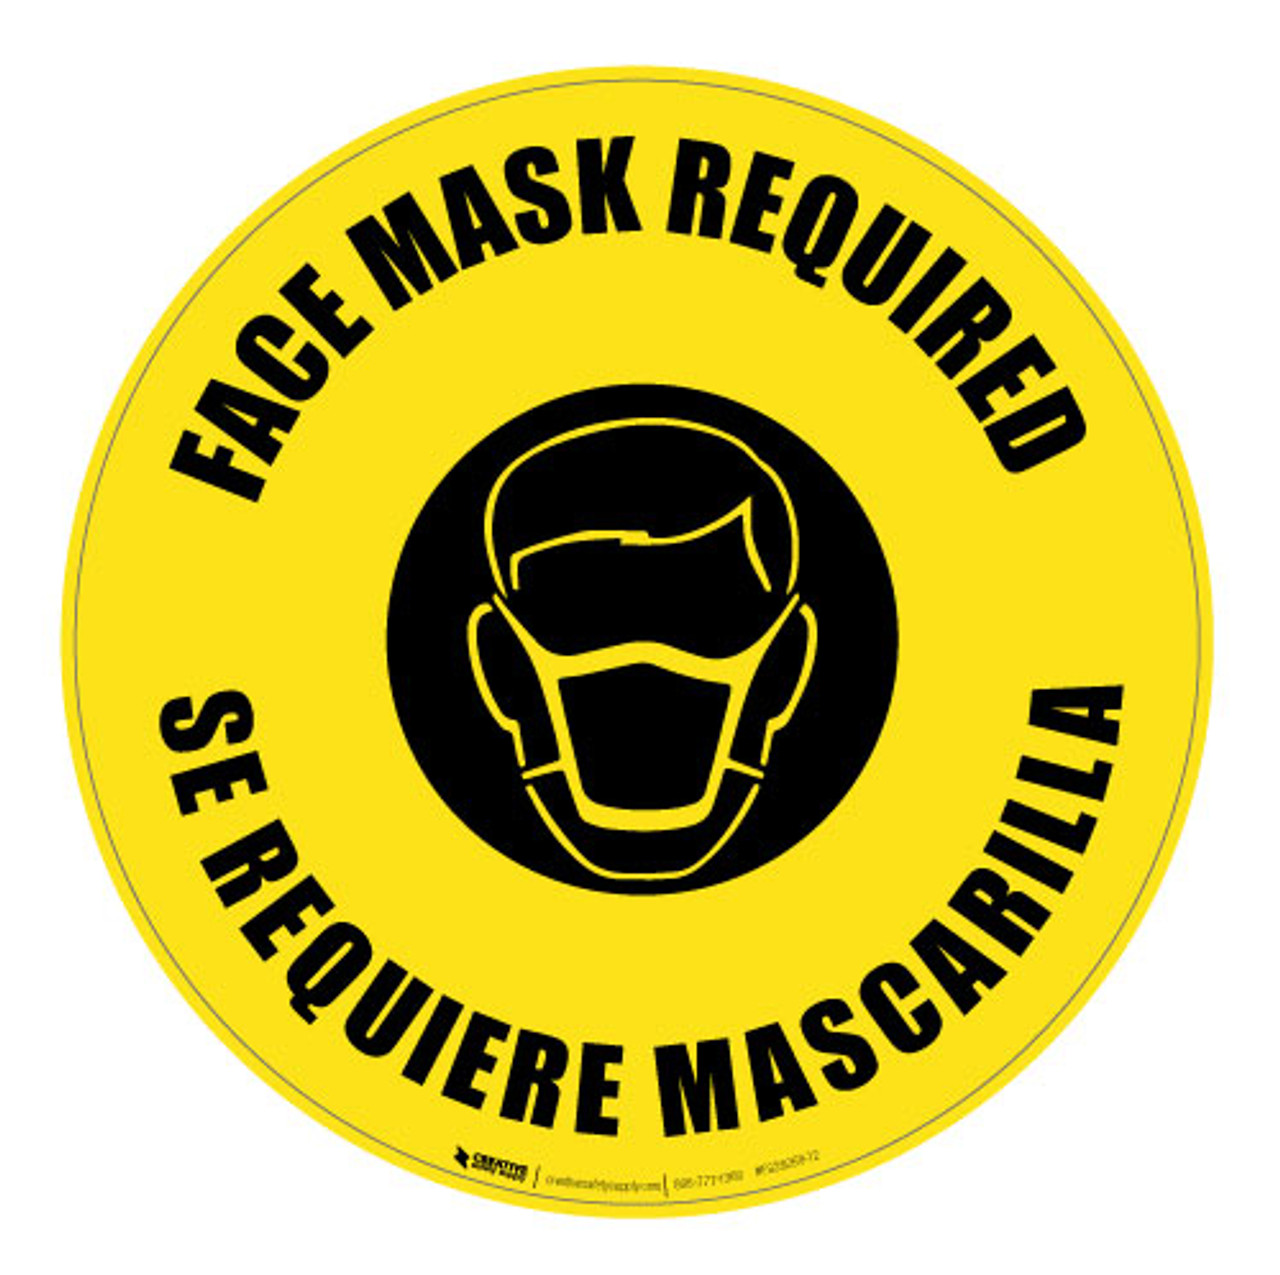 face-mask-required-bilingual-floor-sign-creative-safety-supply